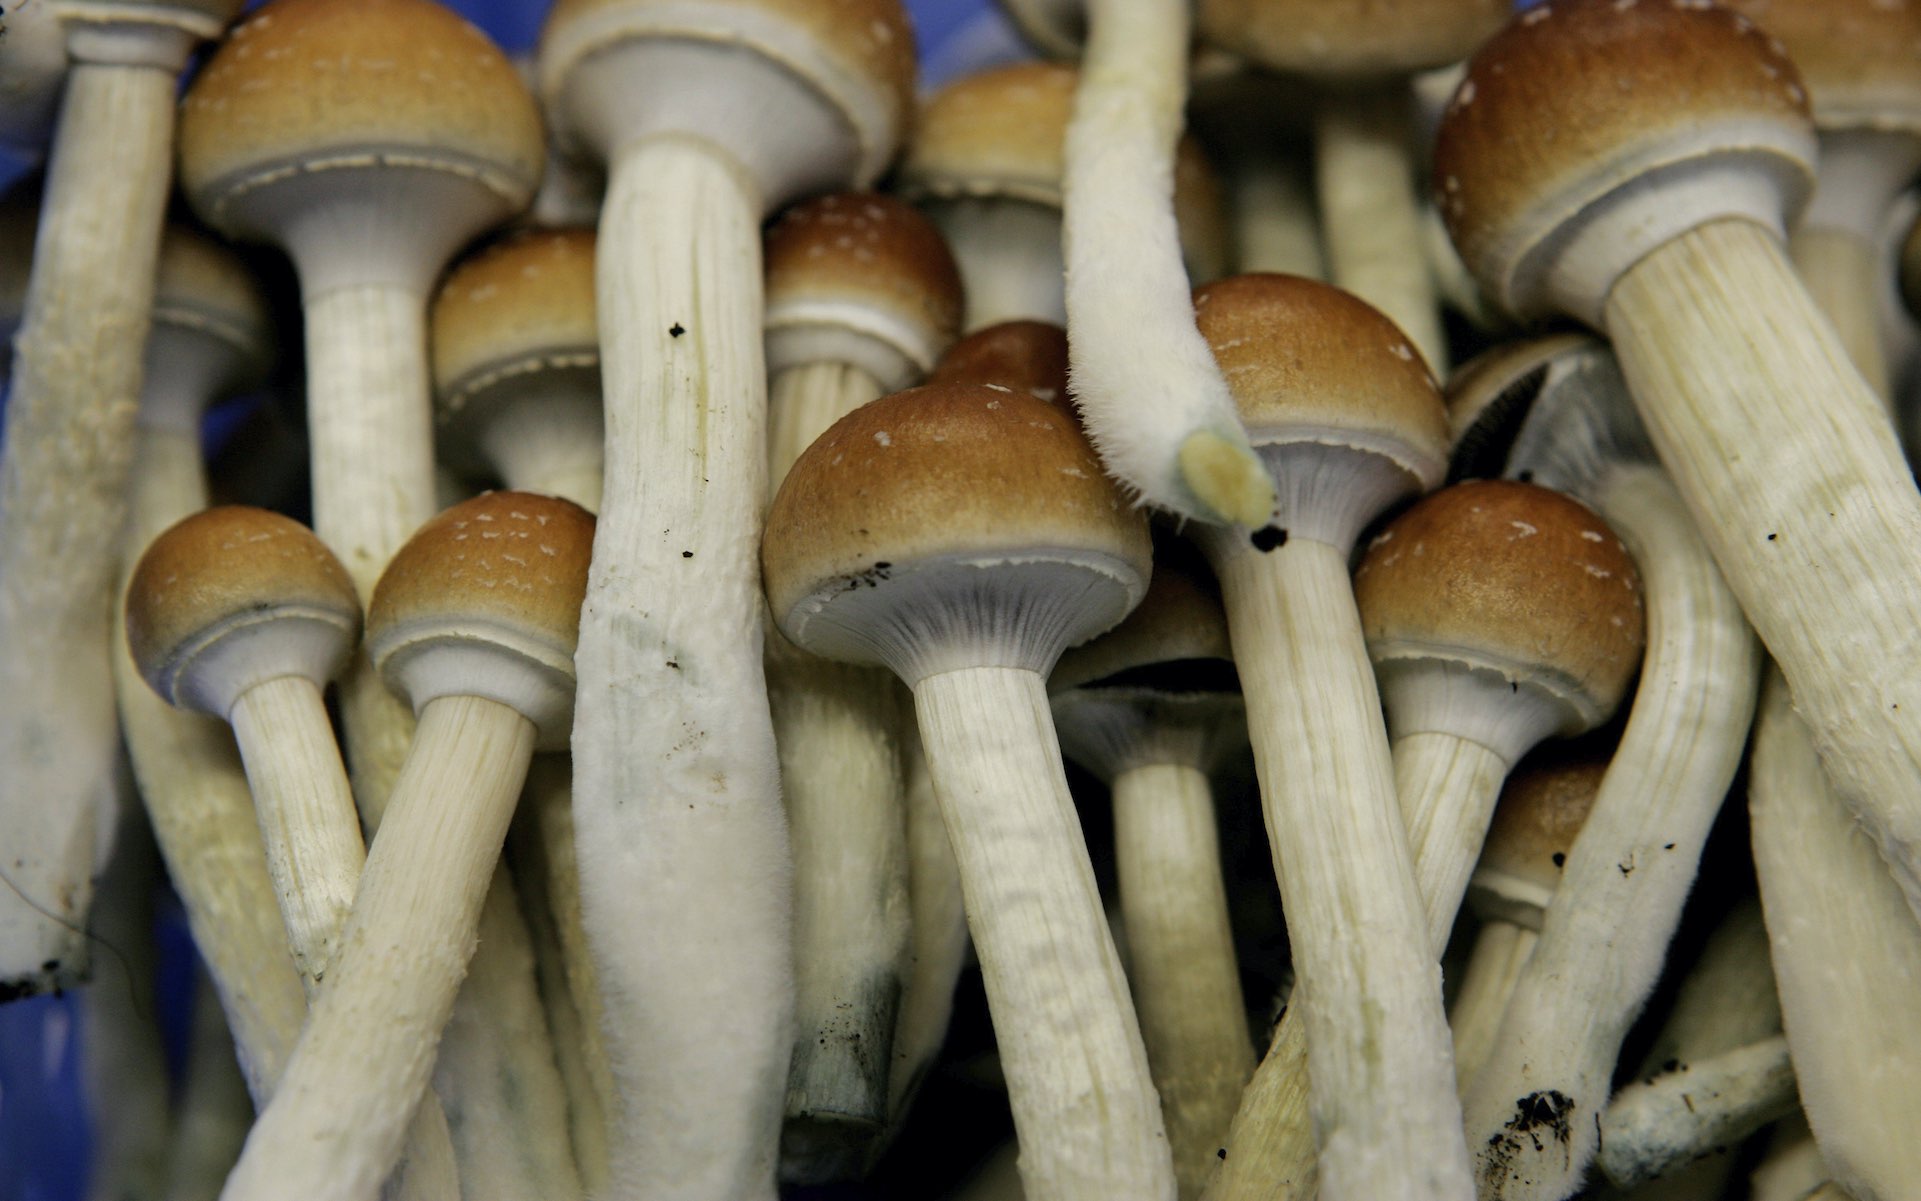 Australia Just Became the First Country to Legalize Shrooms and Ecstasy